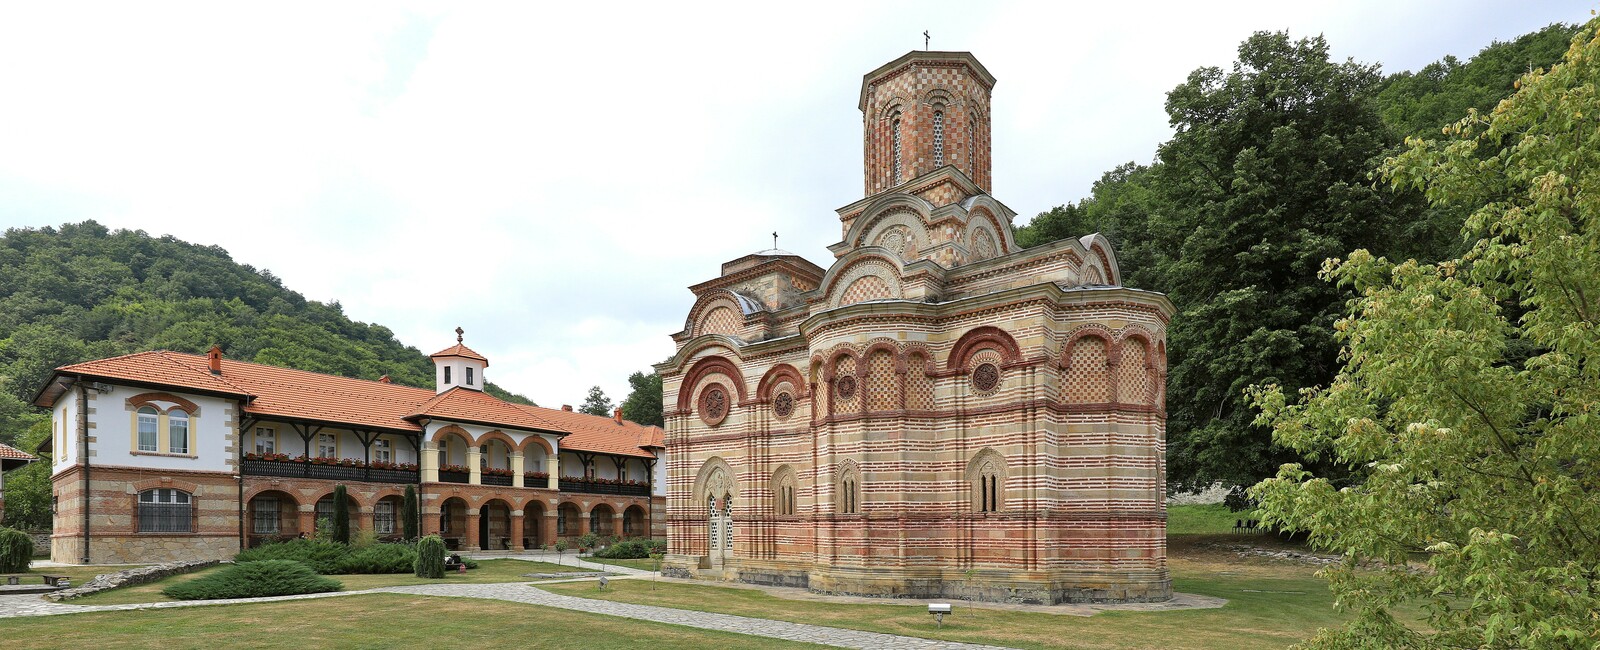 Church and Dormitory